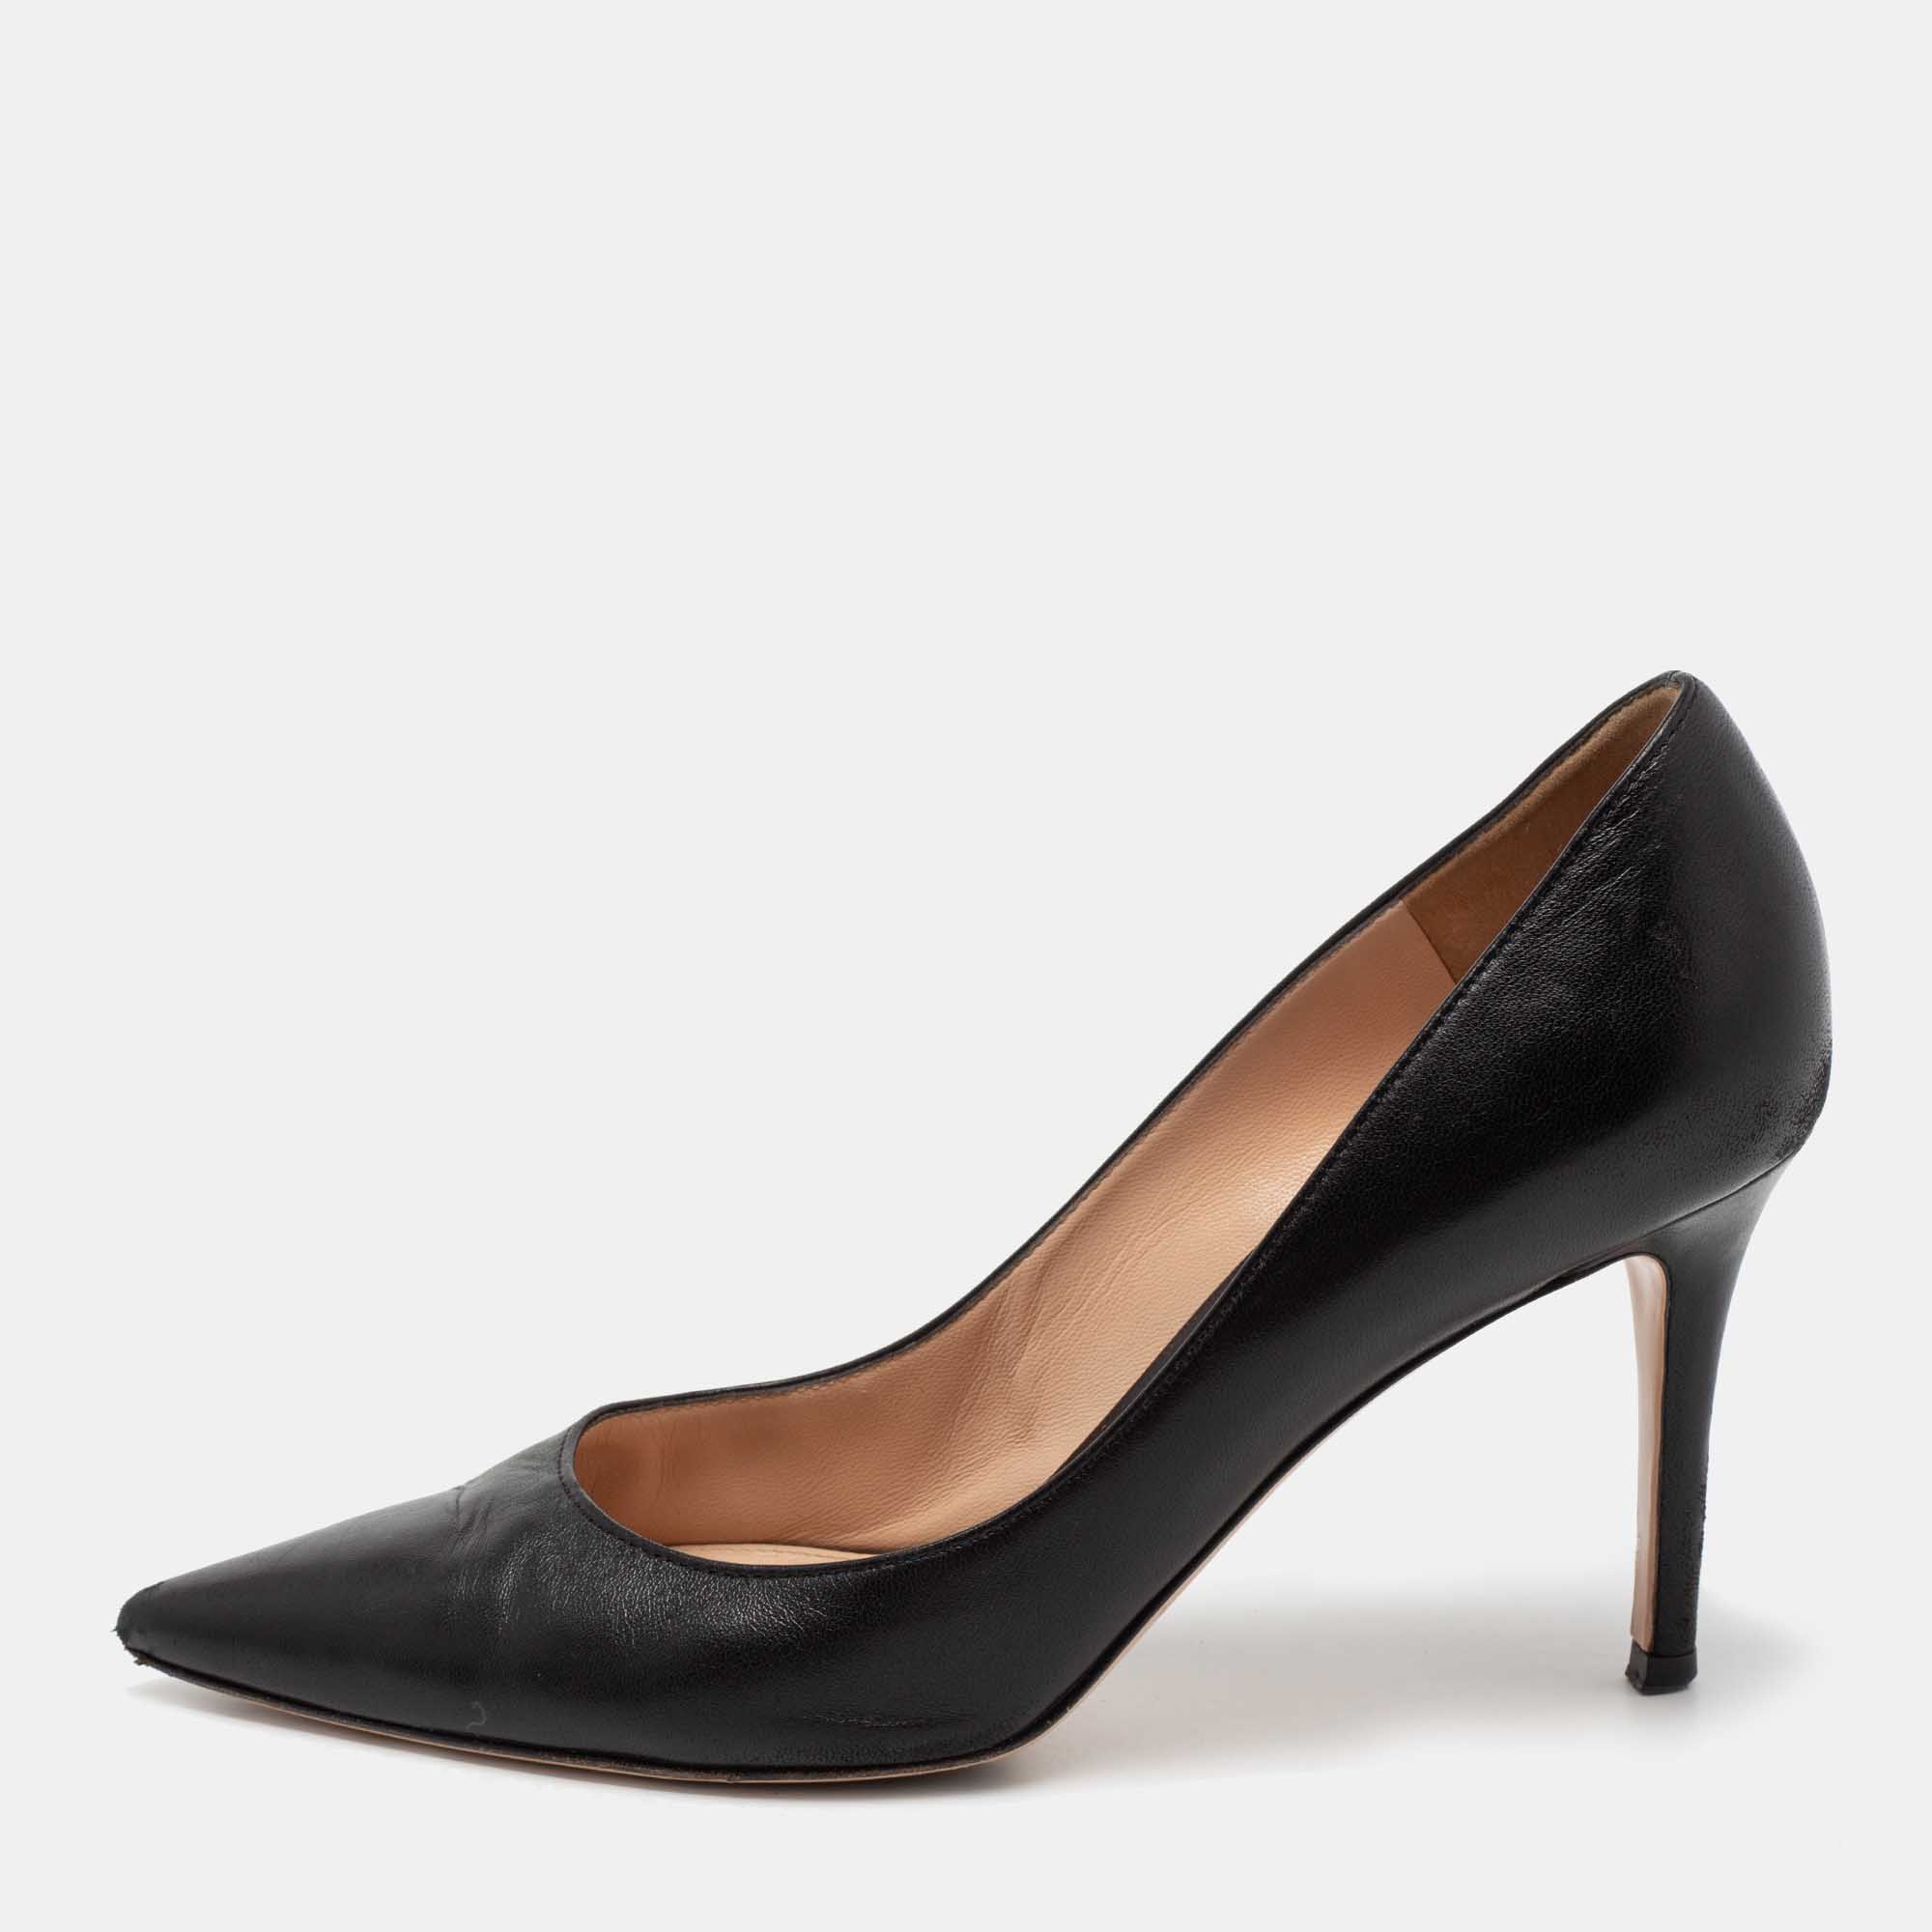 Gianvito Rossi Black Leather Pointed-Toe Pumps Size 37